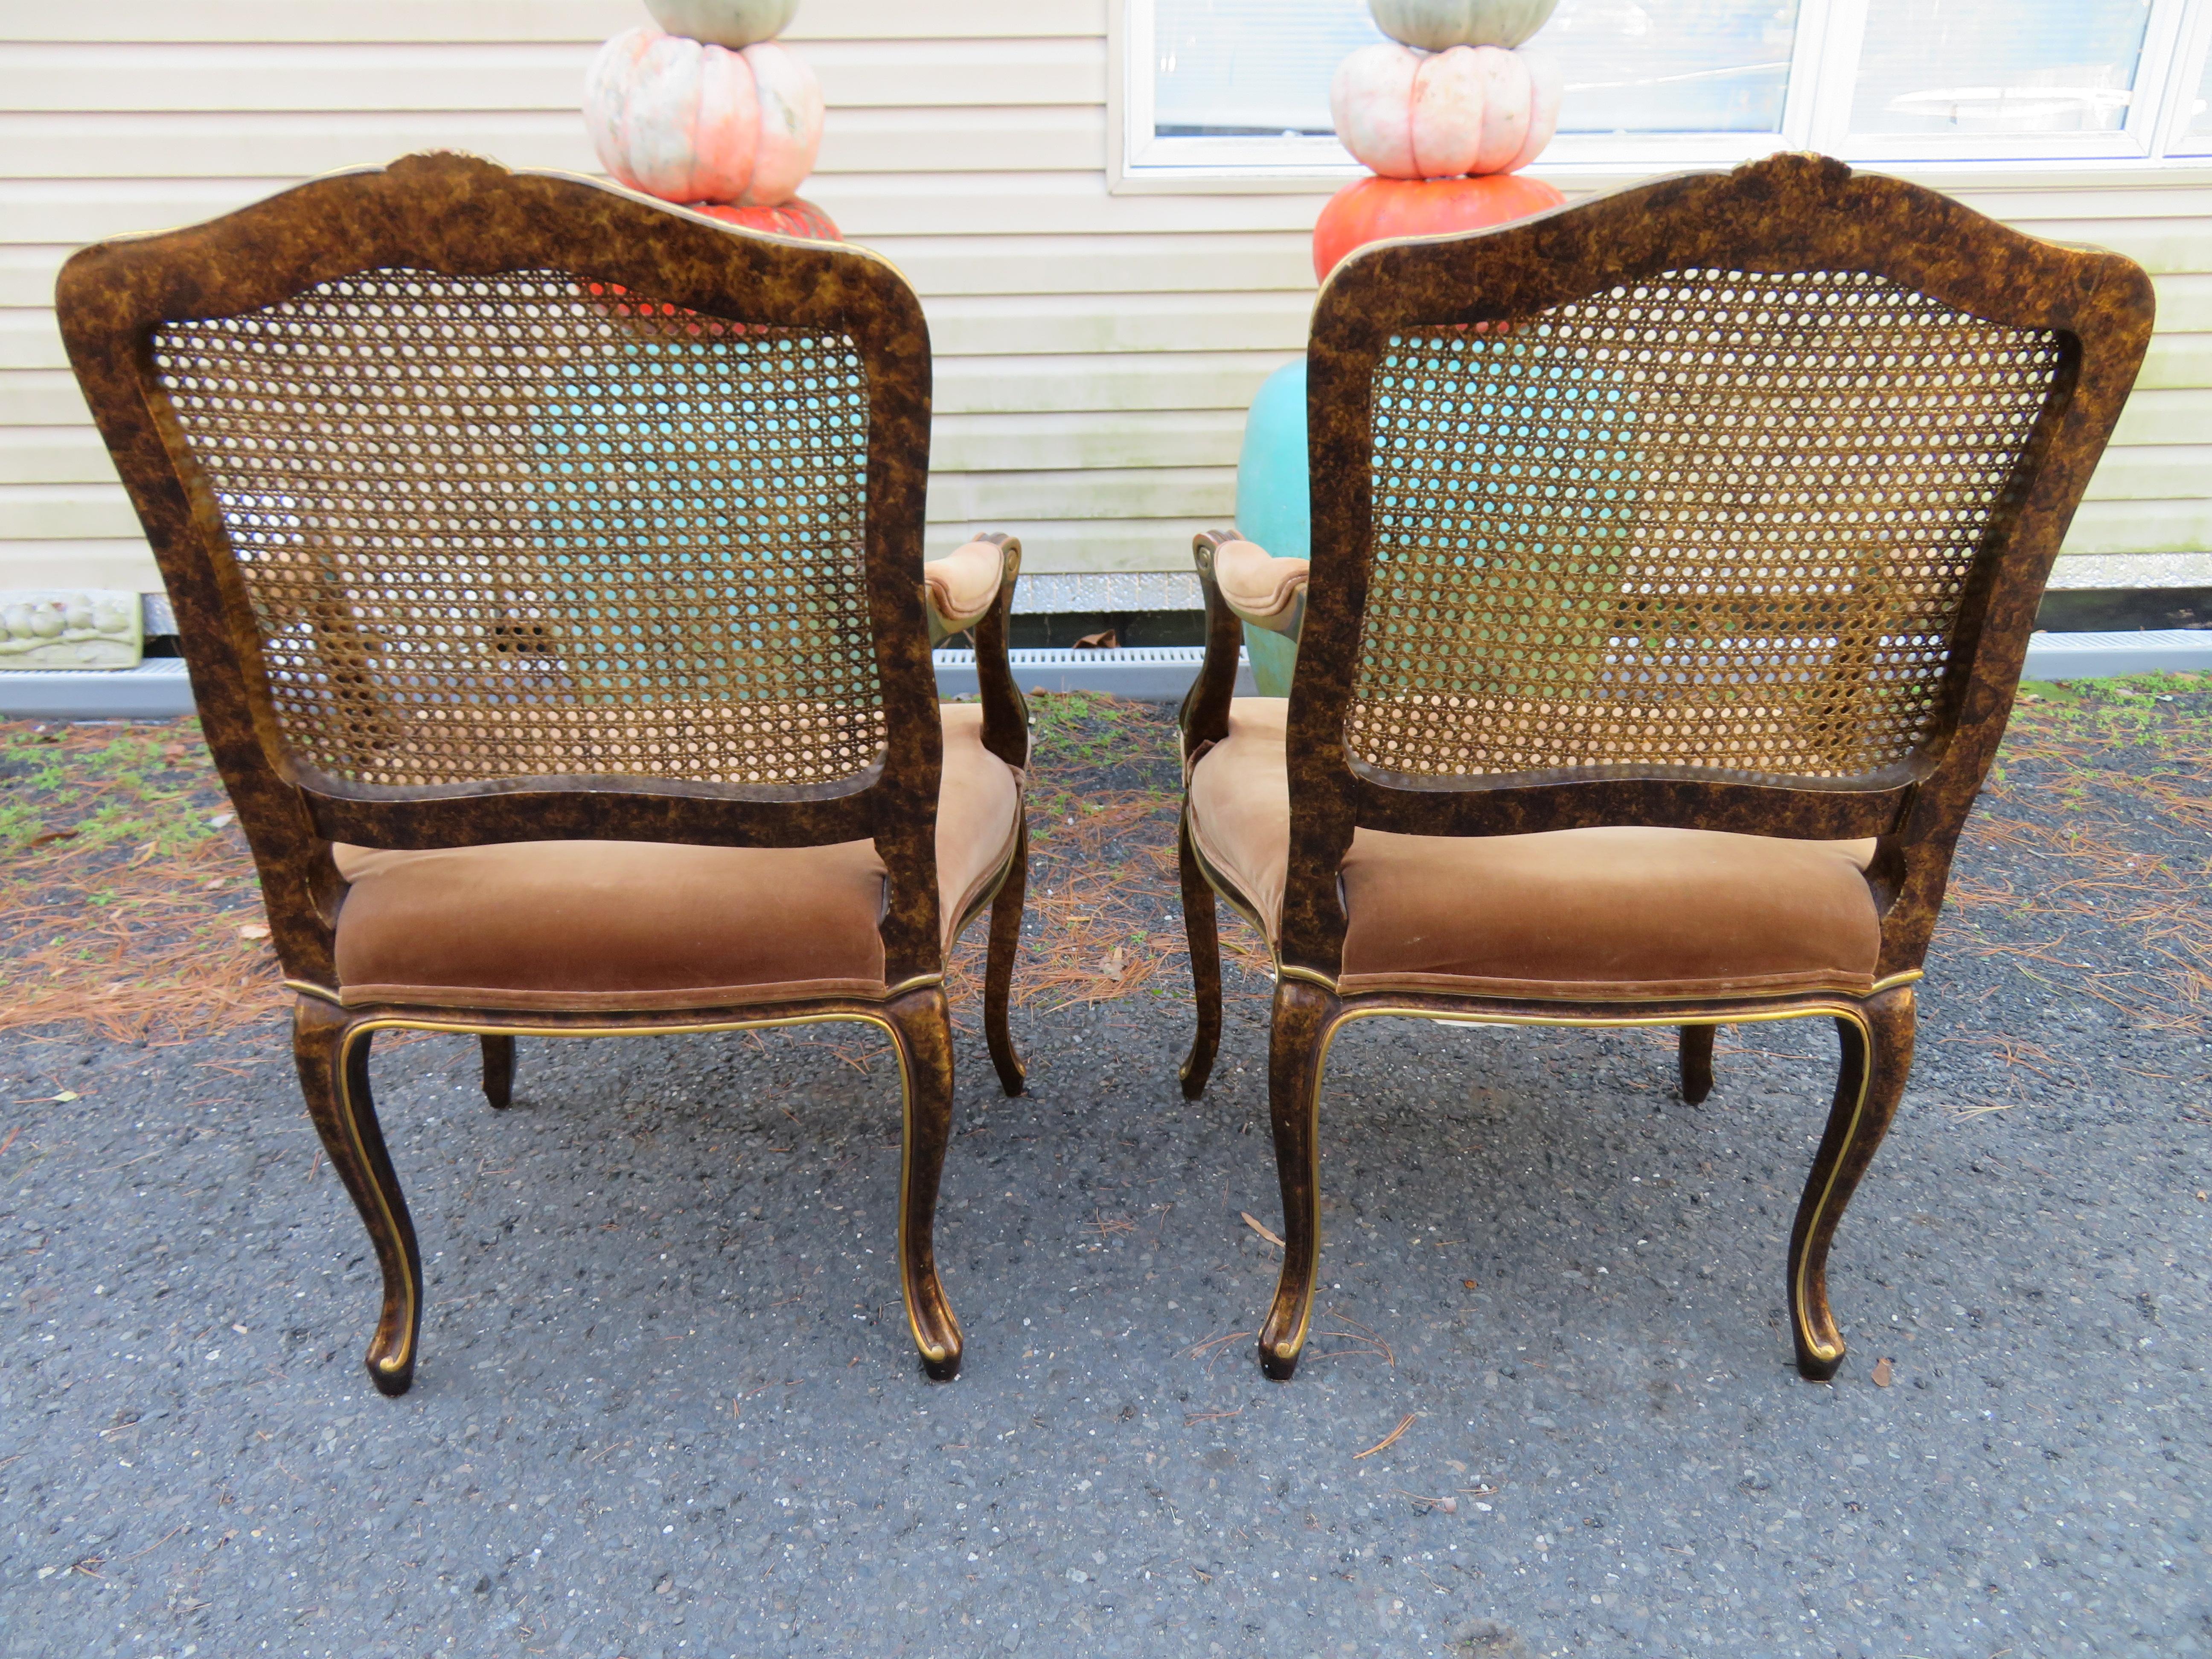 Spectacular Pair Widdicomb Louis XV Fauteuil Chairs Tortoise Shell Caned Back In Good Condition For Sale In Pemberton, NJ